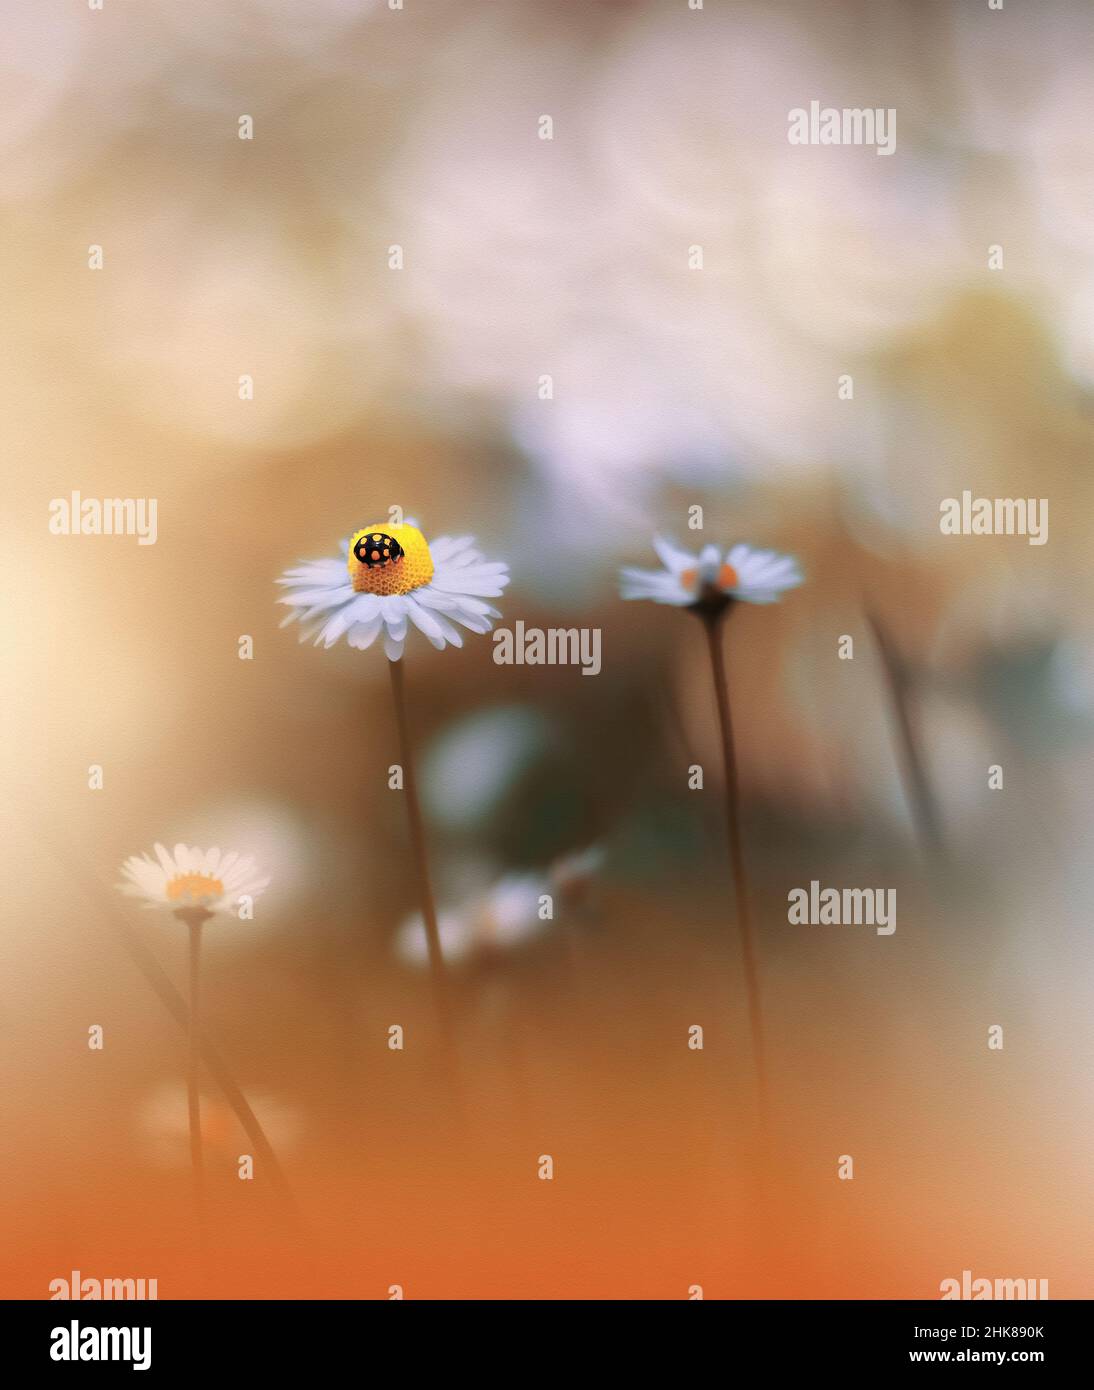 Beautiful Golden Textured Nature Background.Floral Art Design.Macro Photography.Ladybug and Wild Field.Creative Artistic Wallpaper.Summer Flowers. Stock Photo